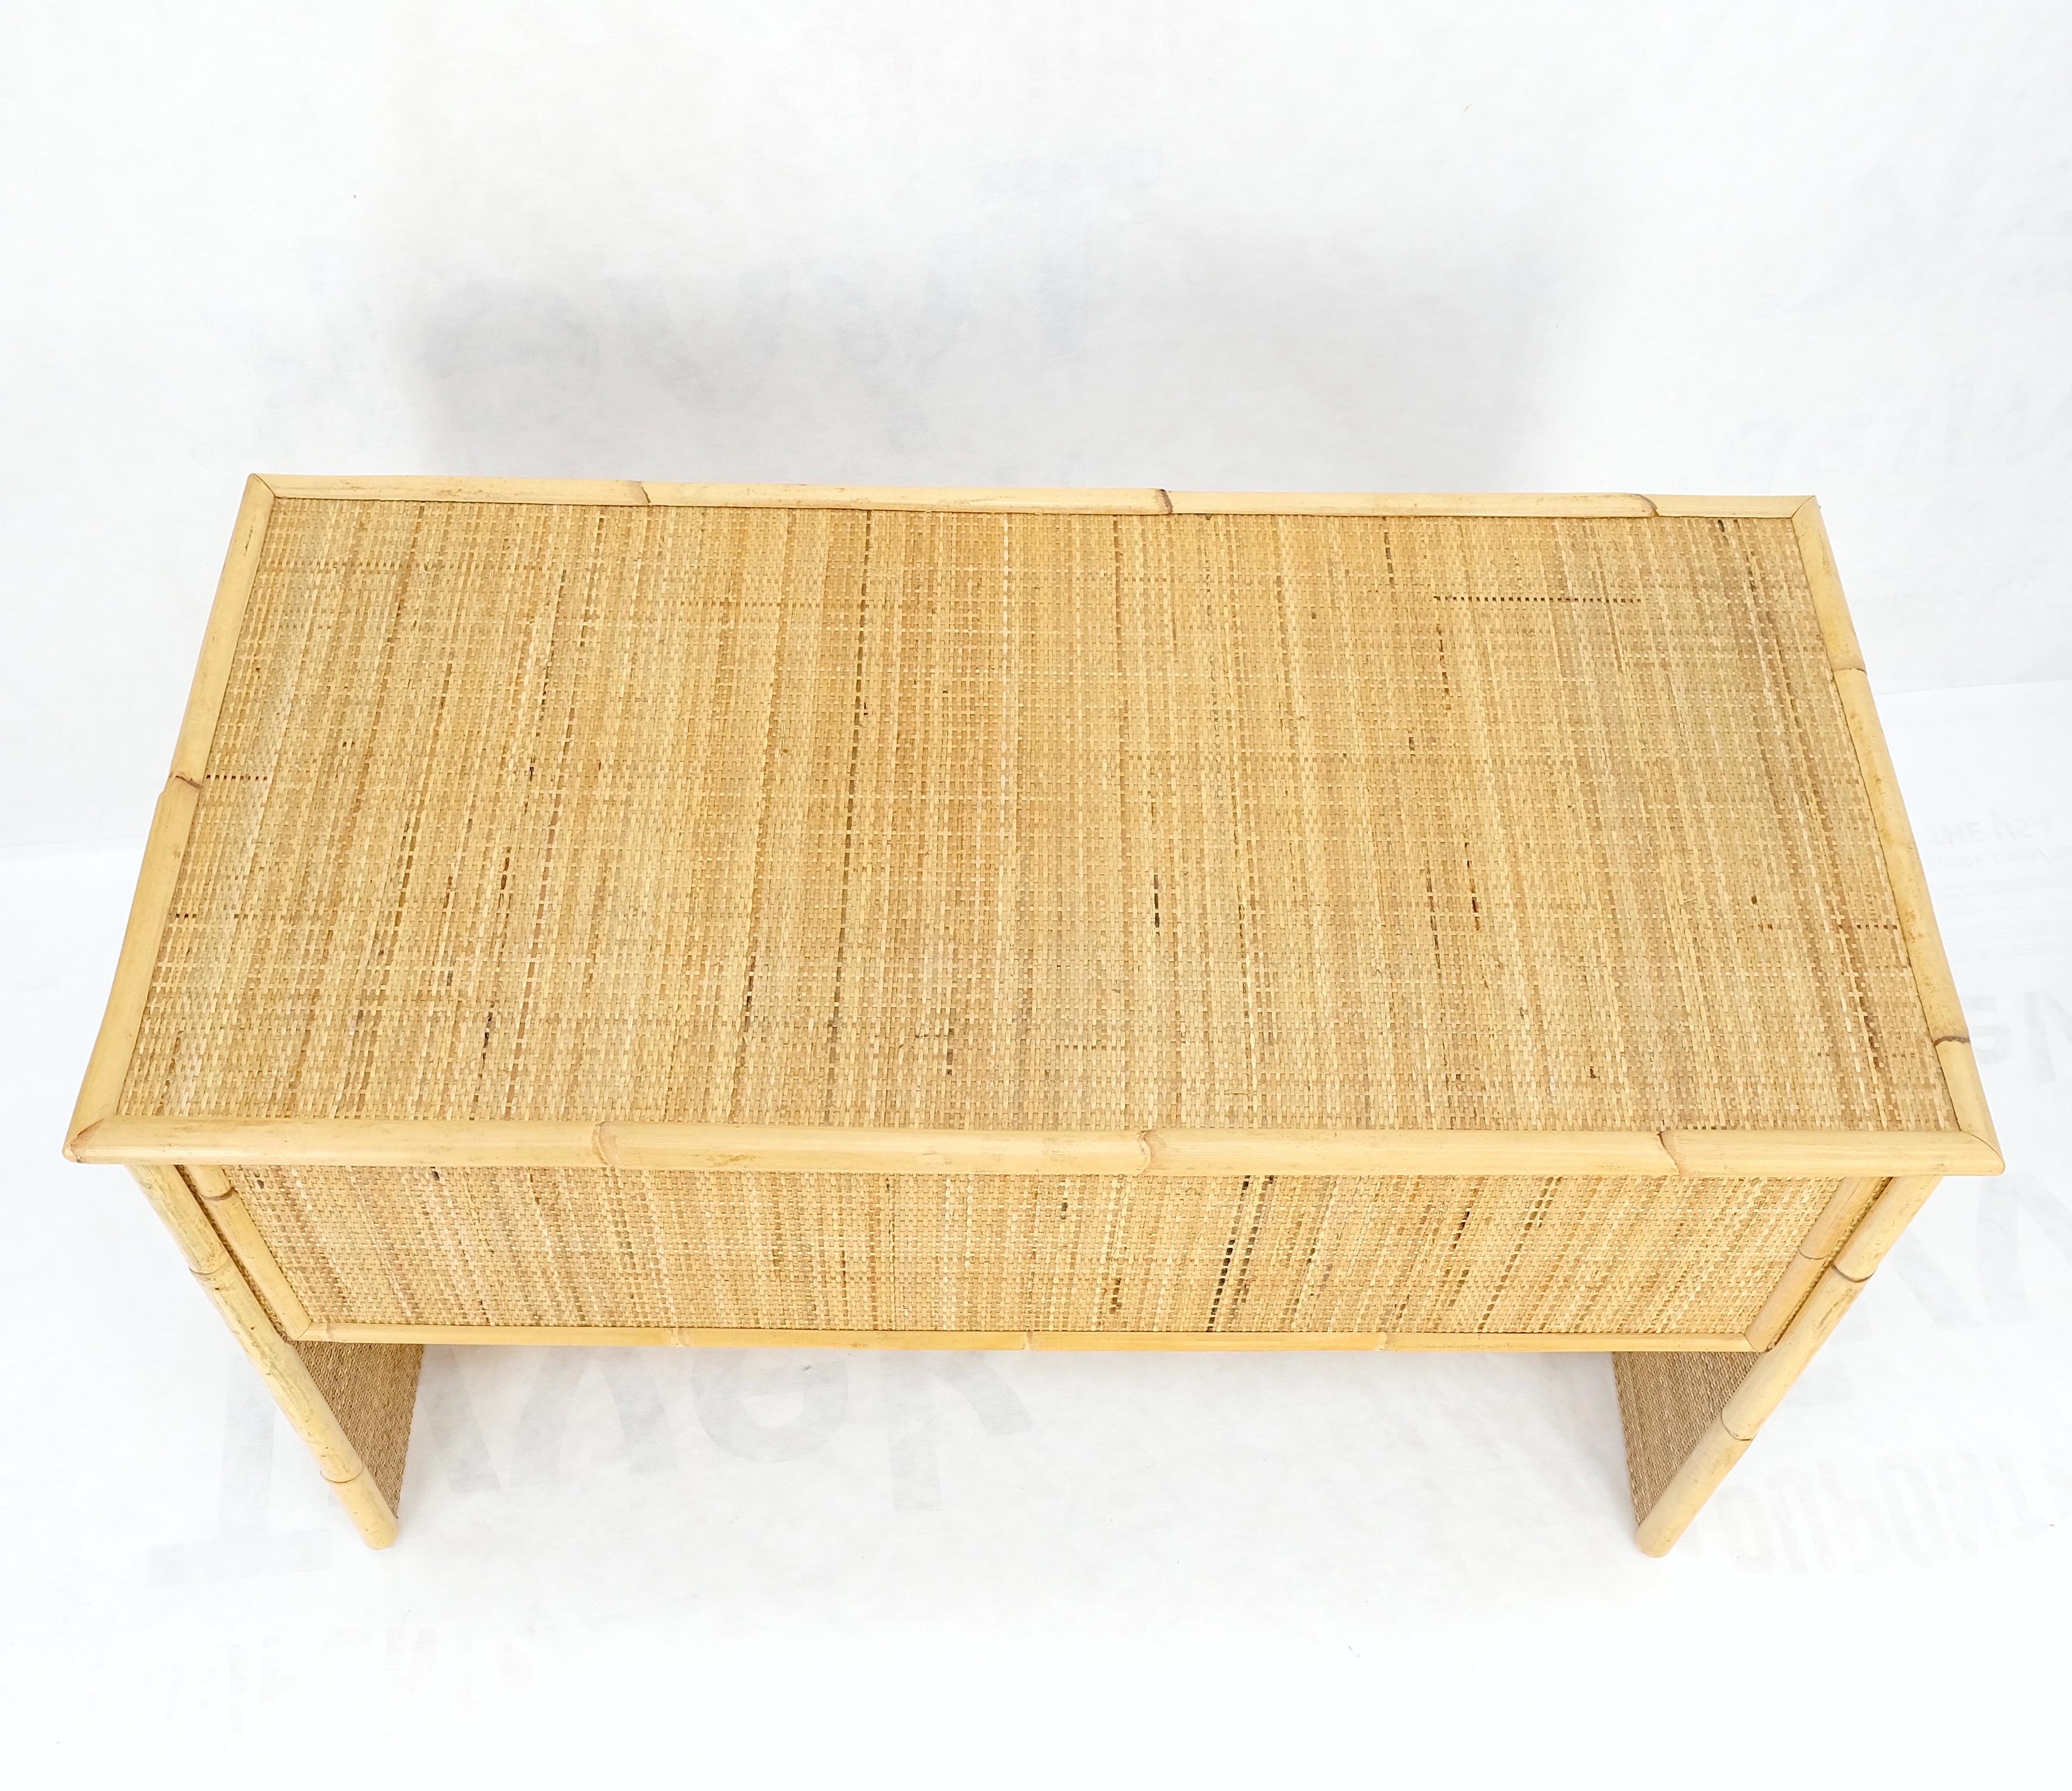 American Mid-Century Modern Bamboo Rattan Cane Two Drawers Brass Pulls Decorative Desk  For Sale